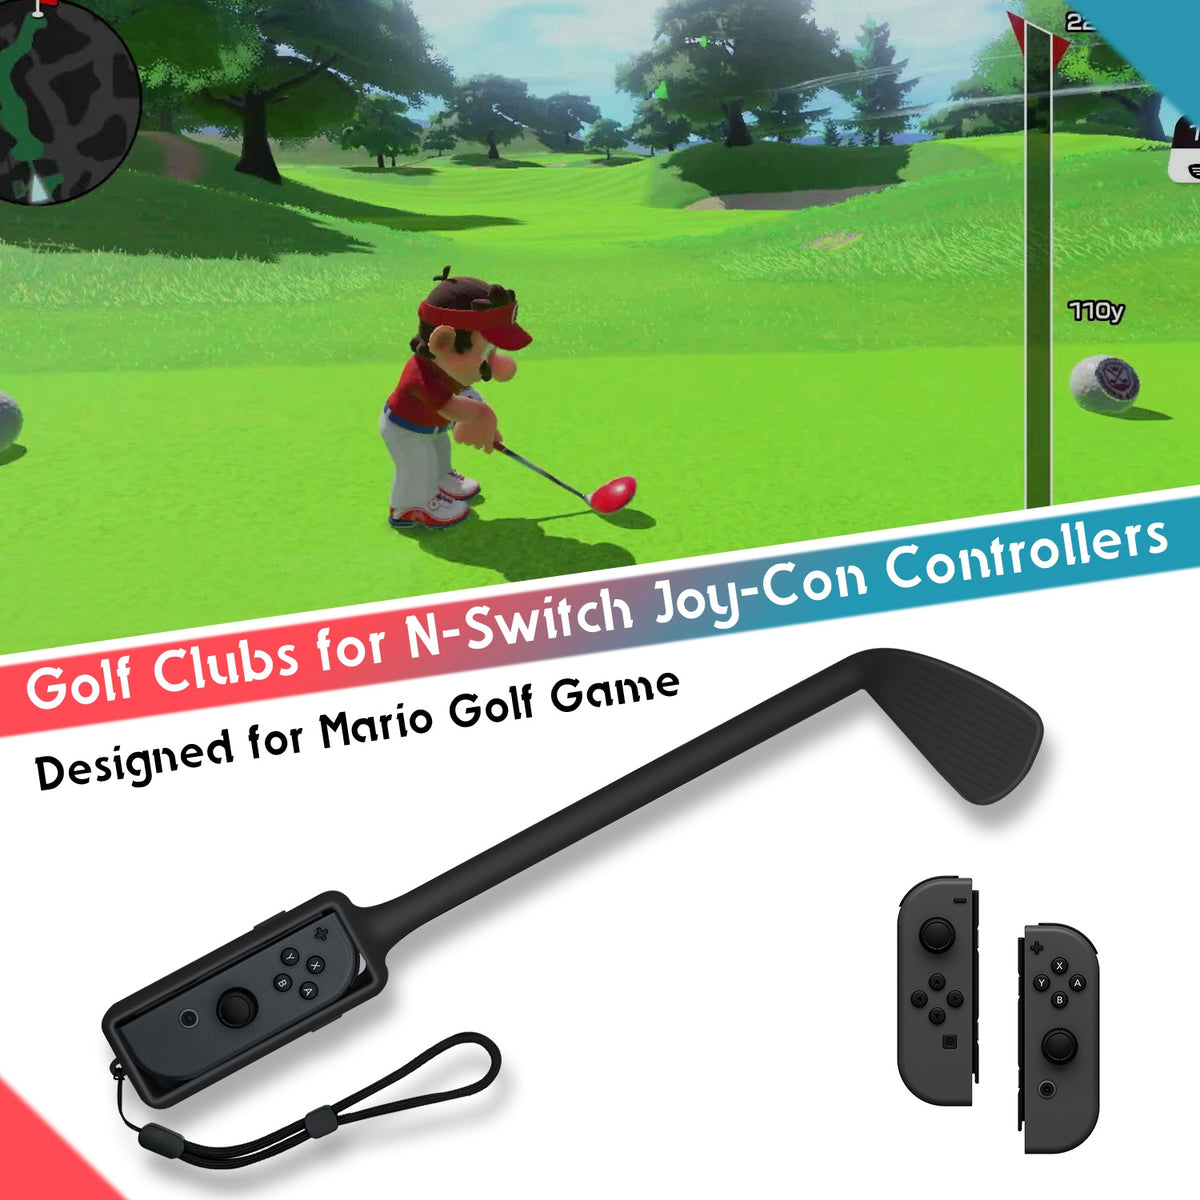 Golf Clubs for Nintendo Switch Controller for Mario Golf Games